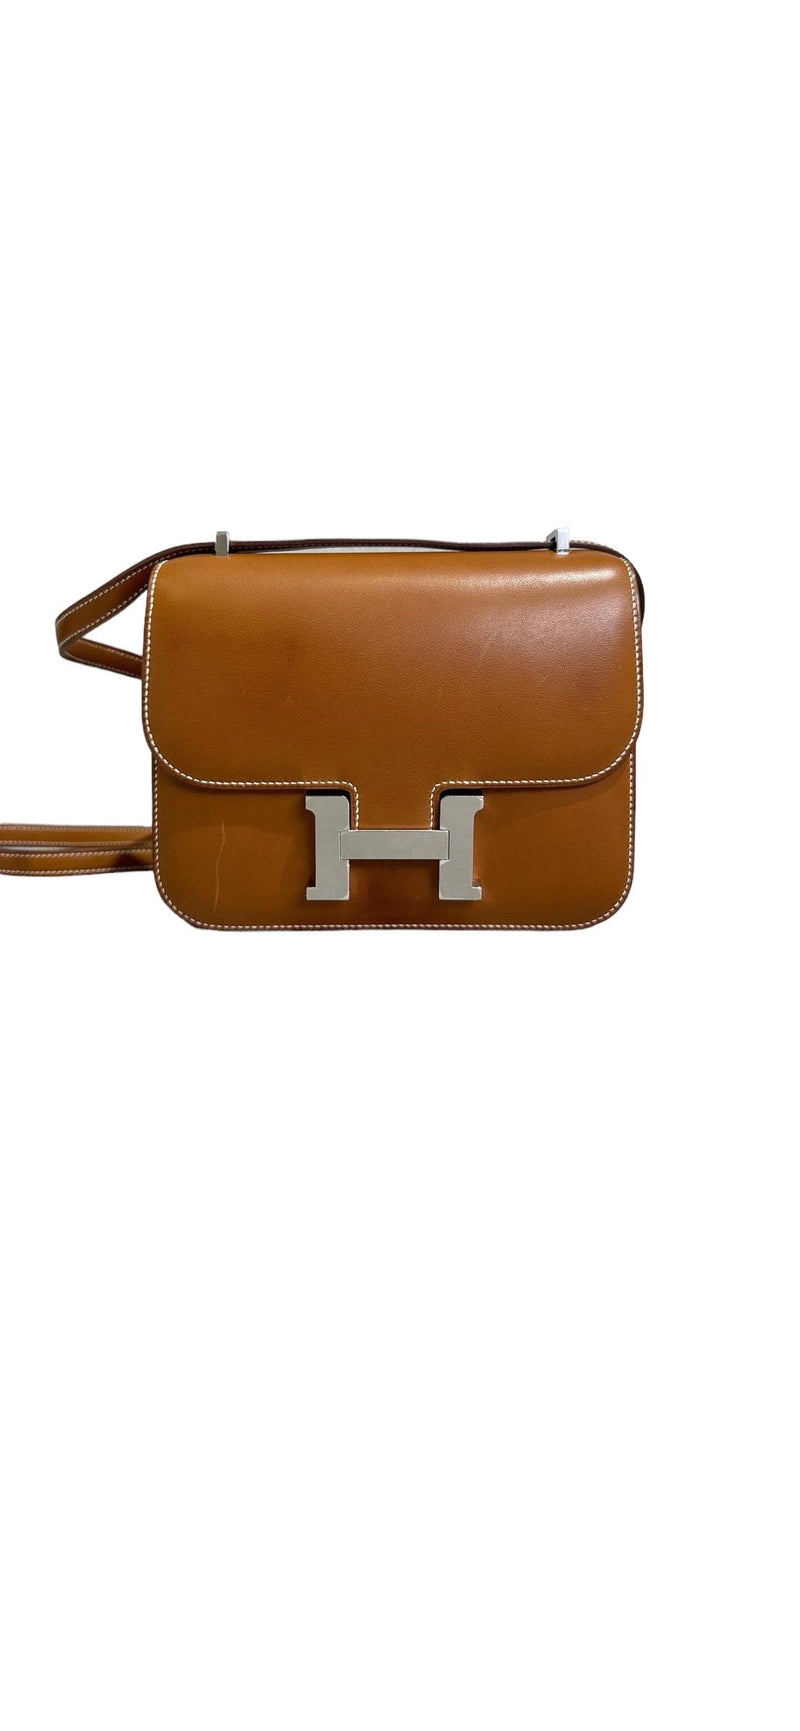 Hermes And Its Selection Of Leathers – LuxuryPromise